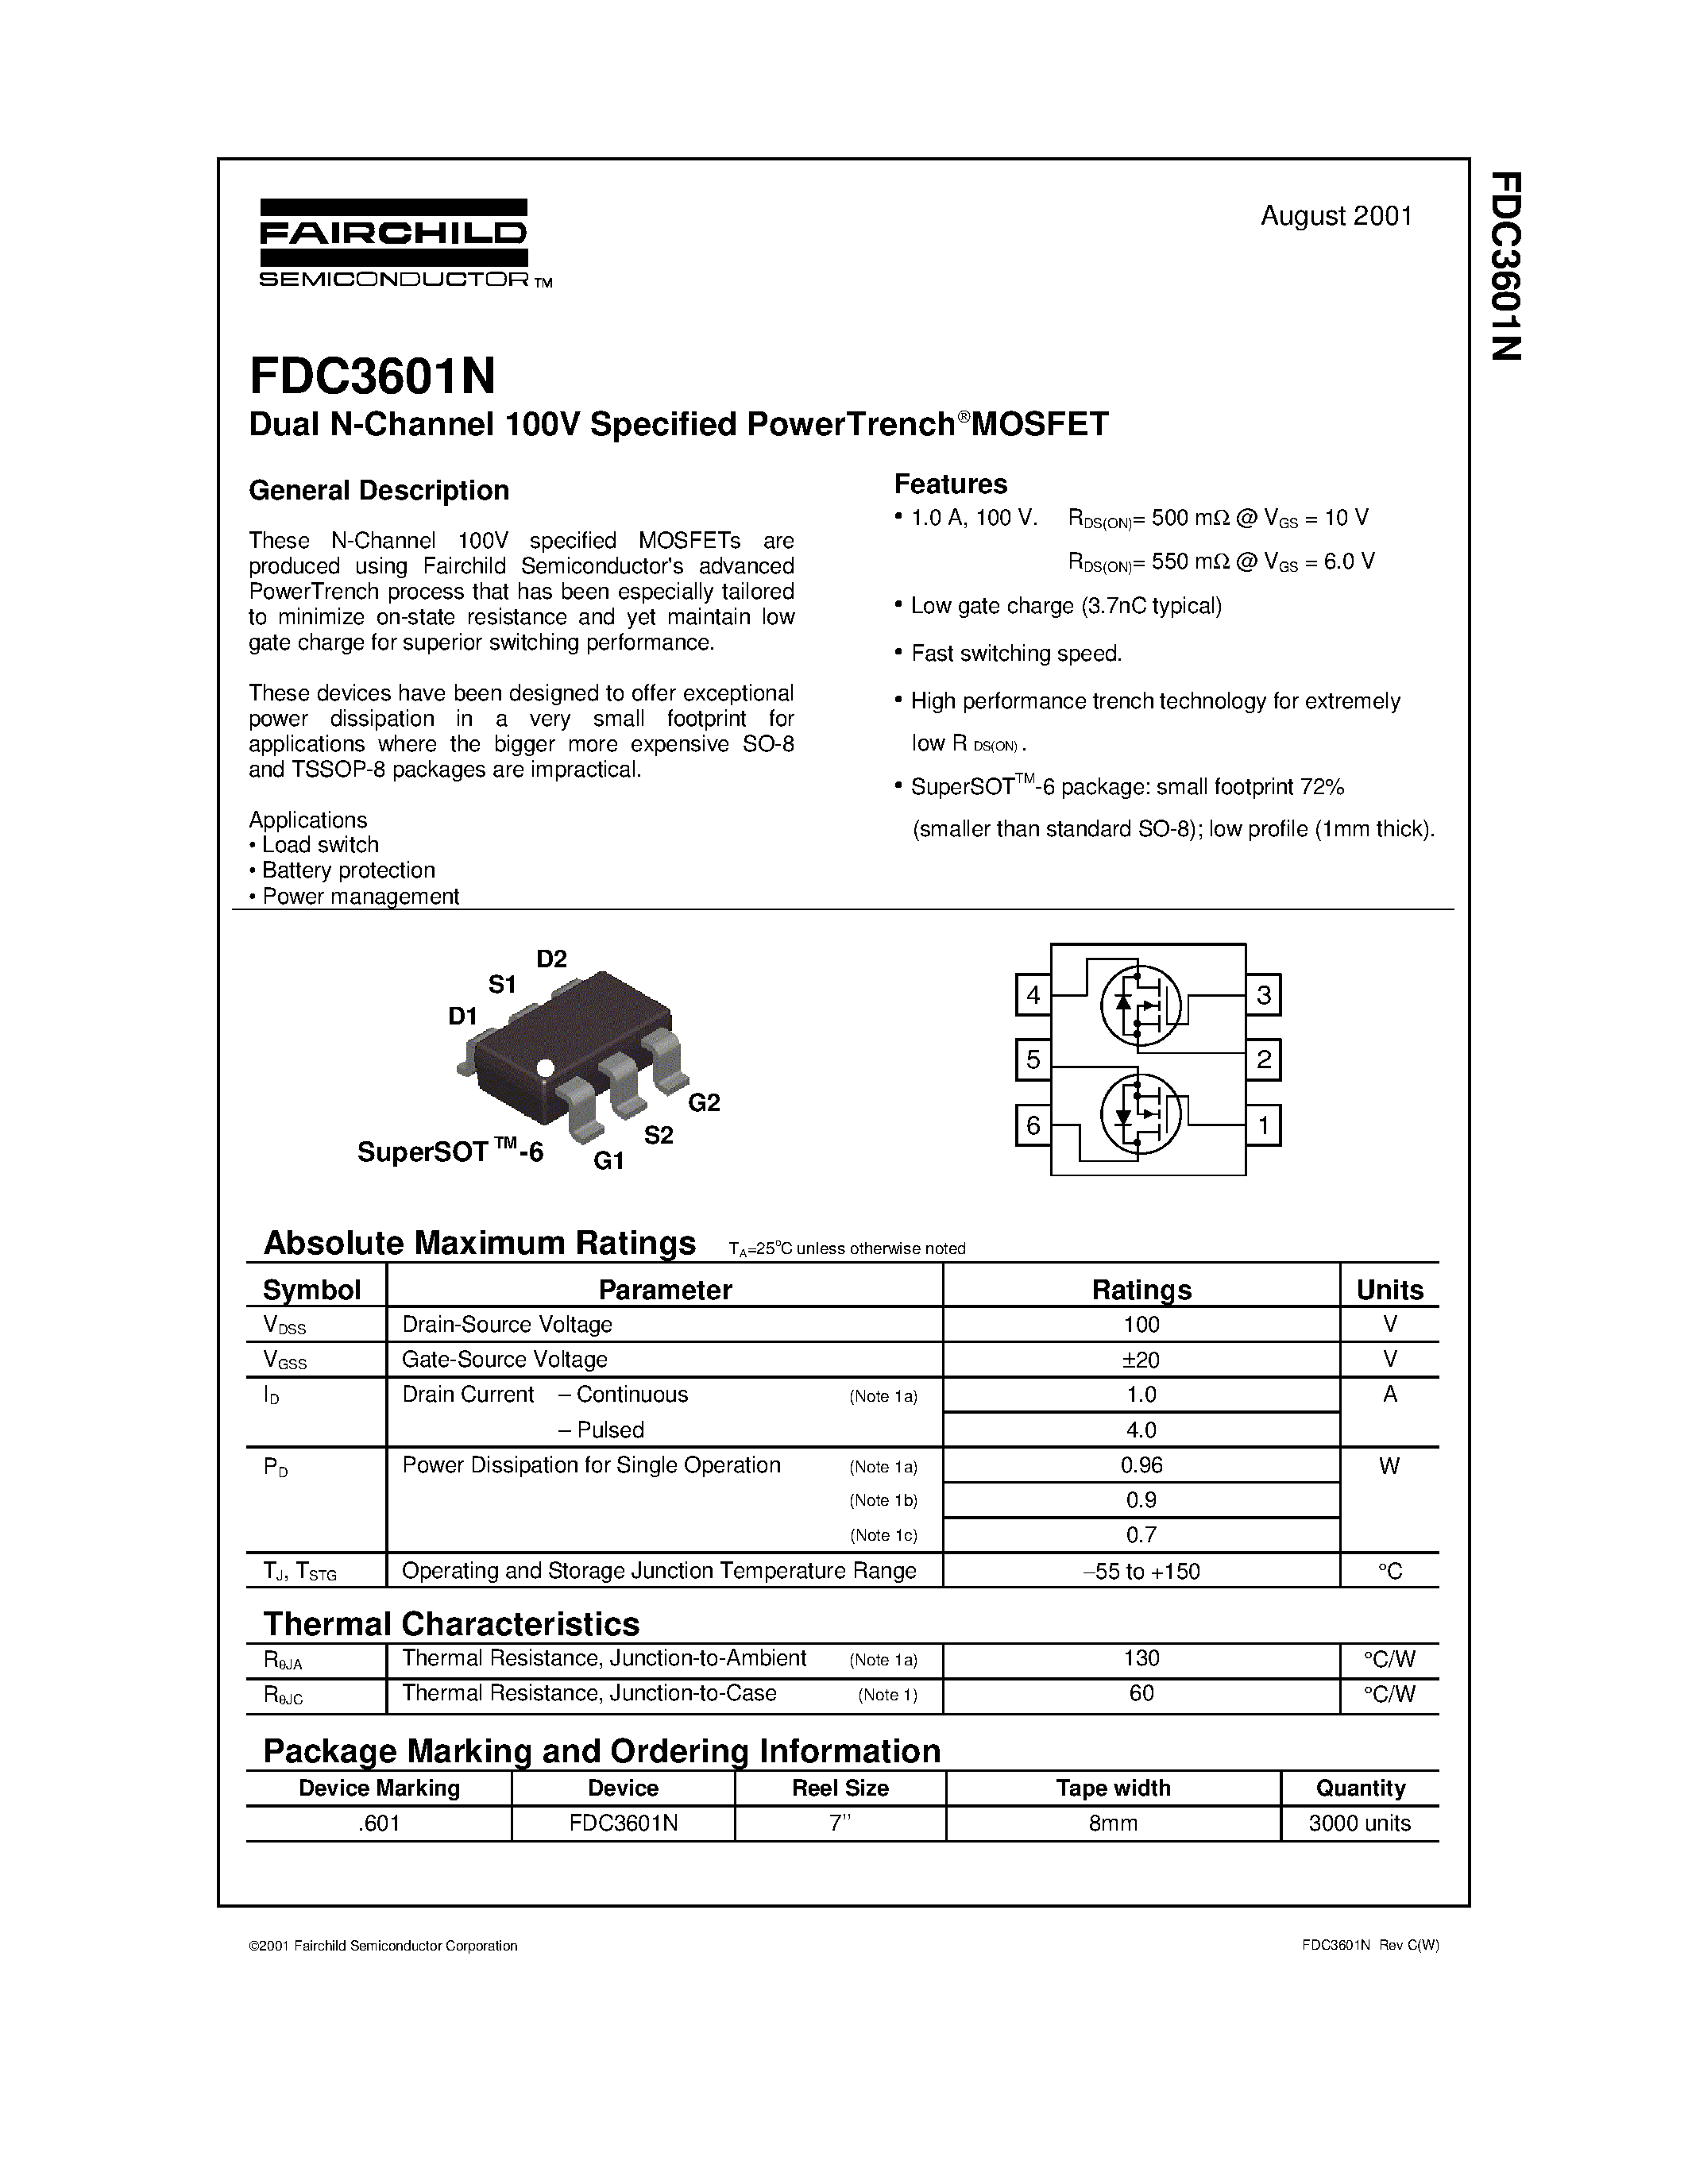 Datasheet FDC3601N - Dual N-Channel 100V Specified PowerTrench MOSFET page 1